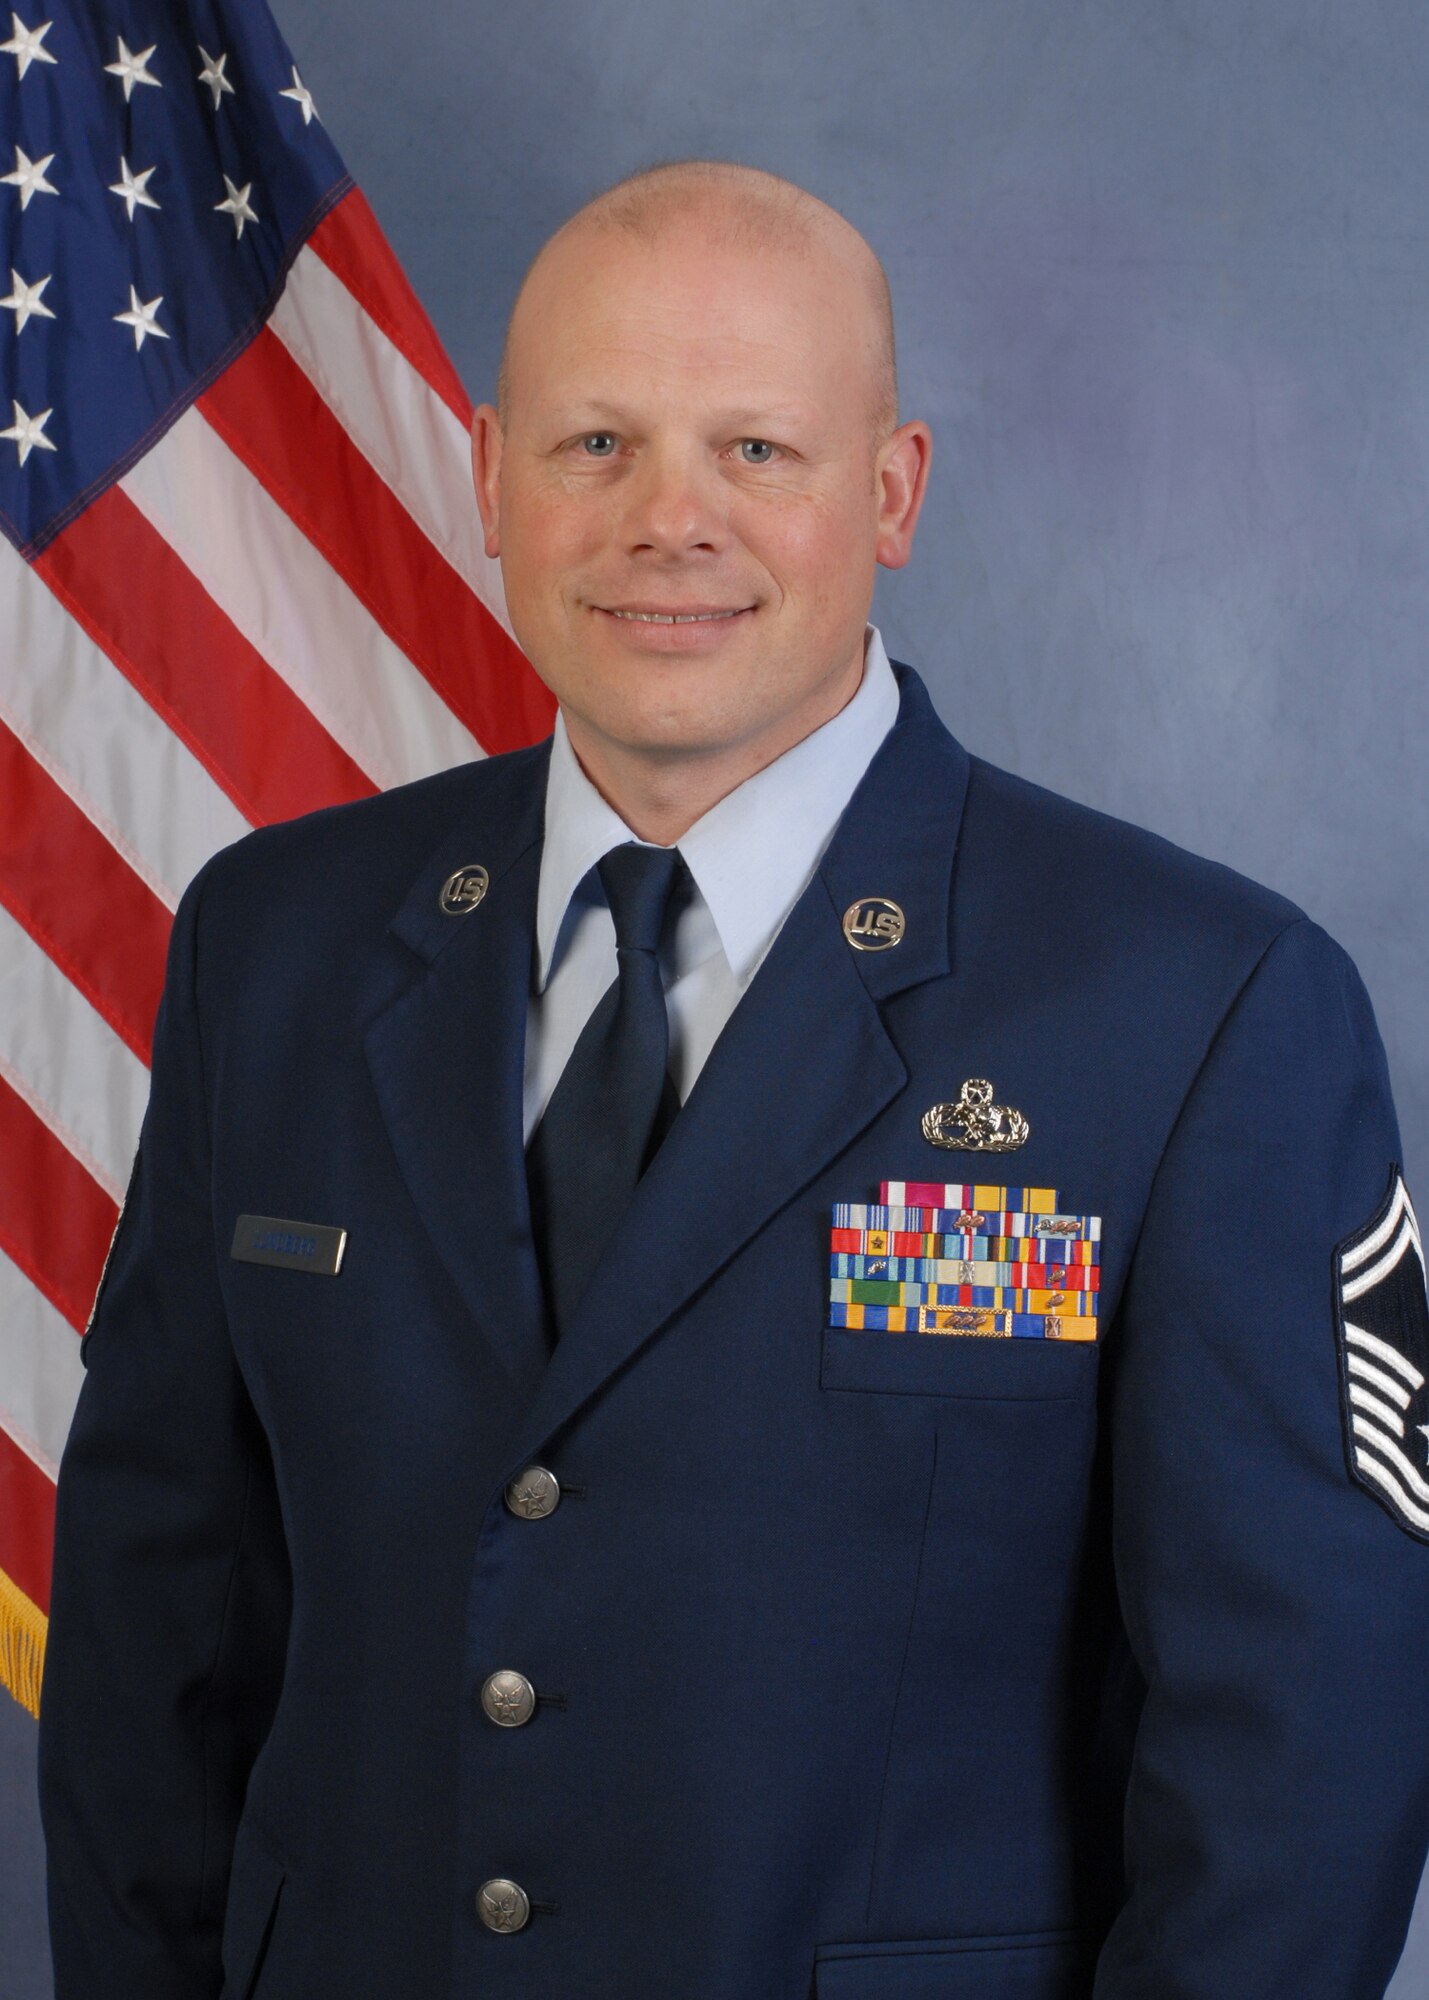 Lundberg demonstrated effective leadership and superior maintenance on multiple occasions. Lundberg assisted in identifying several aircraft safety discrepancies including an Air Force level oxygen regulator malfunction on the F-15 airframe. He was handpicked to lead an aircraft inspection team for a runway departure mishap that successfully identified the root cause.

During the 2014 Wing Unit Effectiveness Inspection Lundberg’s guidance and expertise helped the wing to achieve a Highly Effective rating. He led the wing to safety milestones, surpassed 65,000 Class-A Mishap-free flying hours highlighting the maintenance group’s safety experience. Lundberg is a dynamic Chief Inspector and directs operations across an energetic six Air Force Specialty Code office. He is conscious about self-improvement and he constantly seeking ways to educate himself on the job. He holds a Community College of the Air Force degree in Aerospace Propulsion Technology. 
